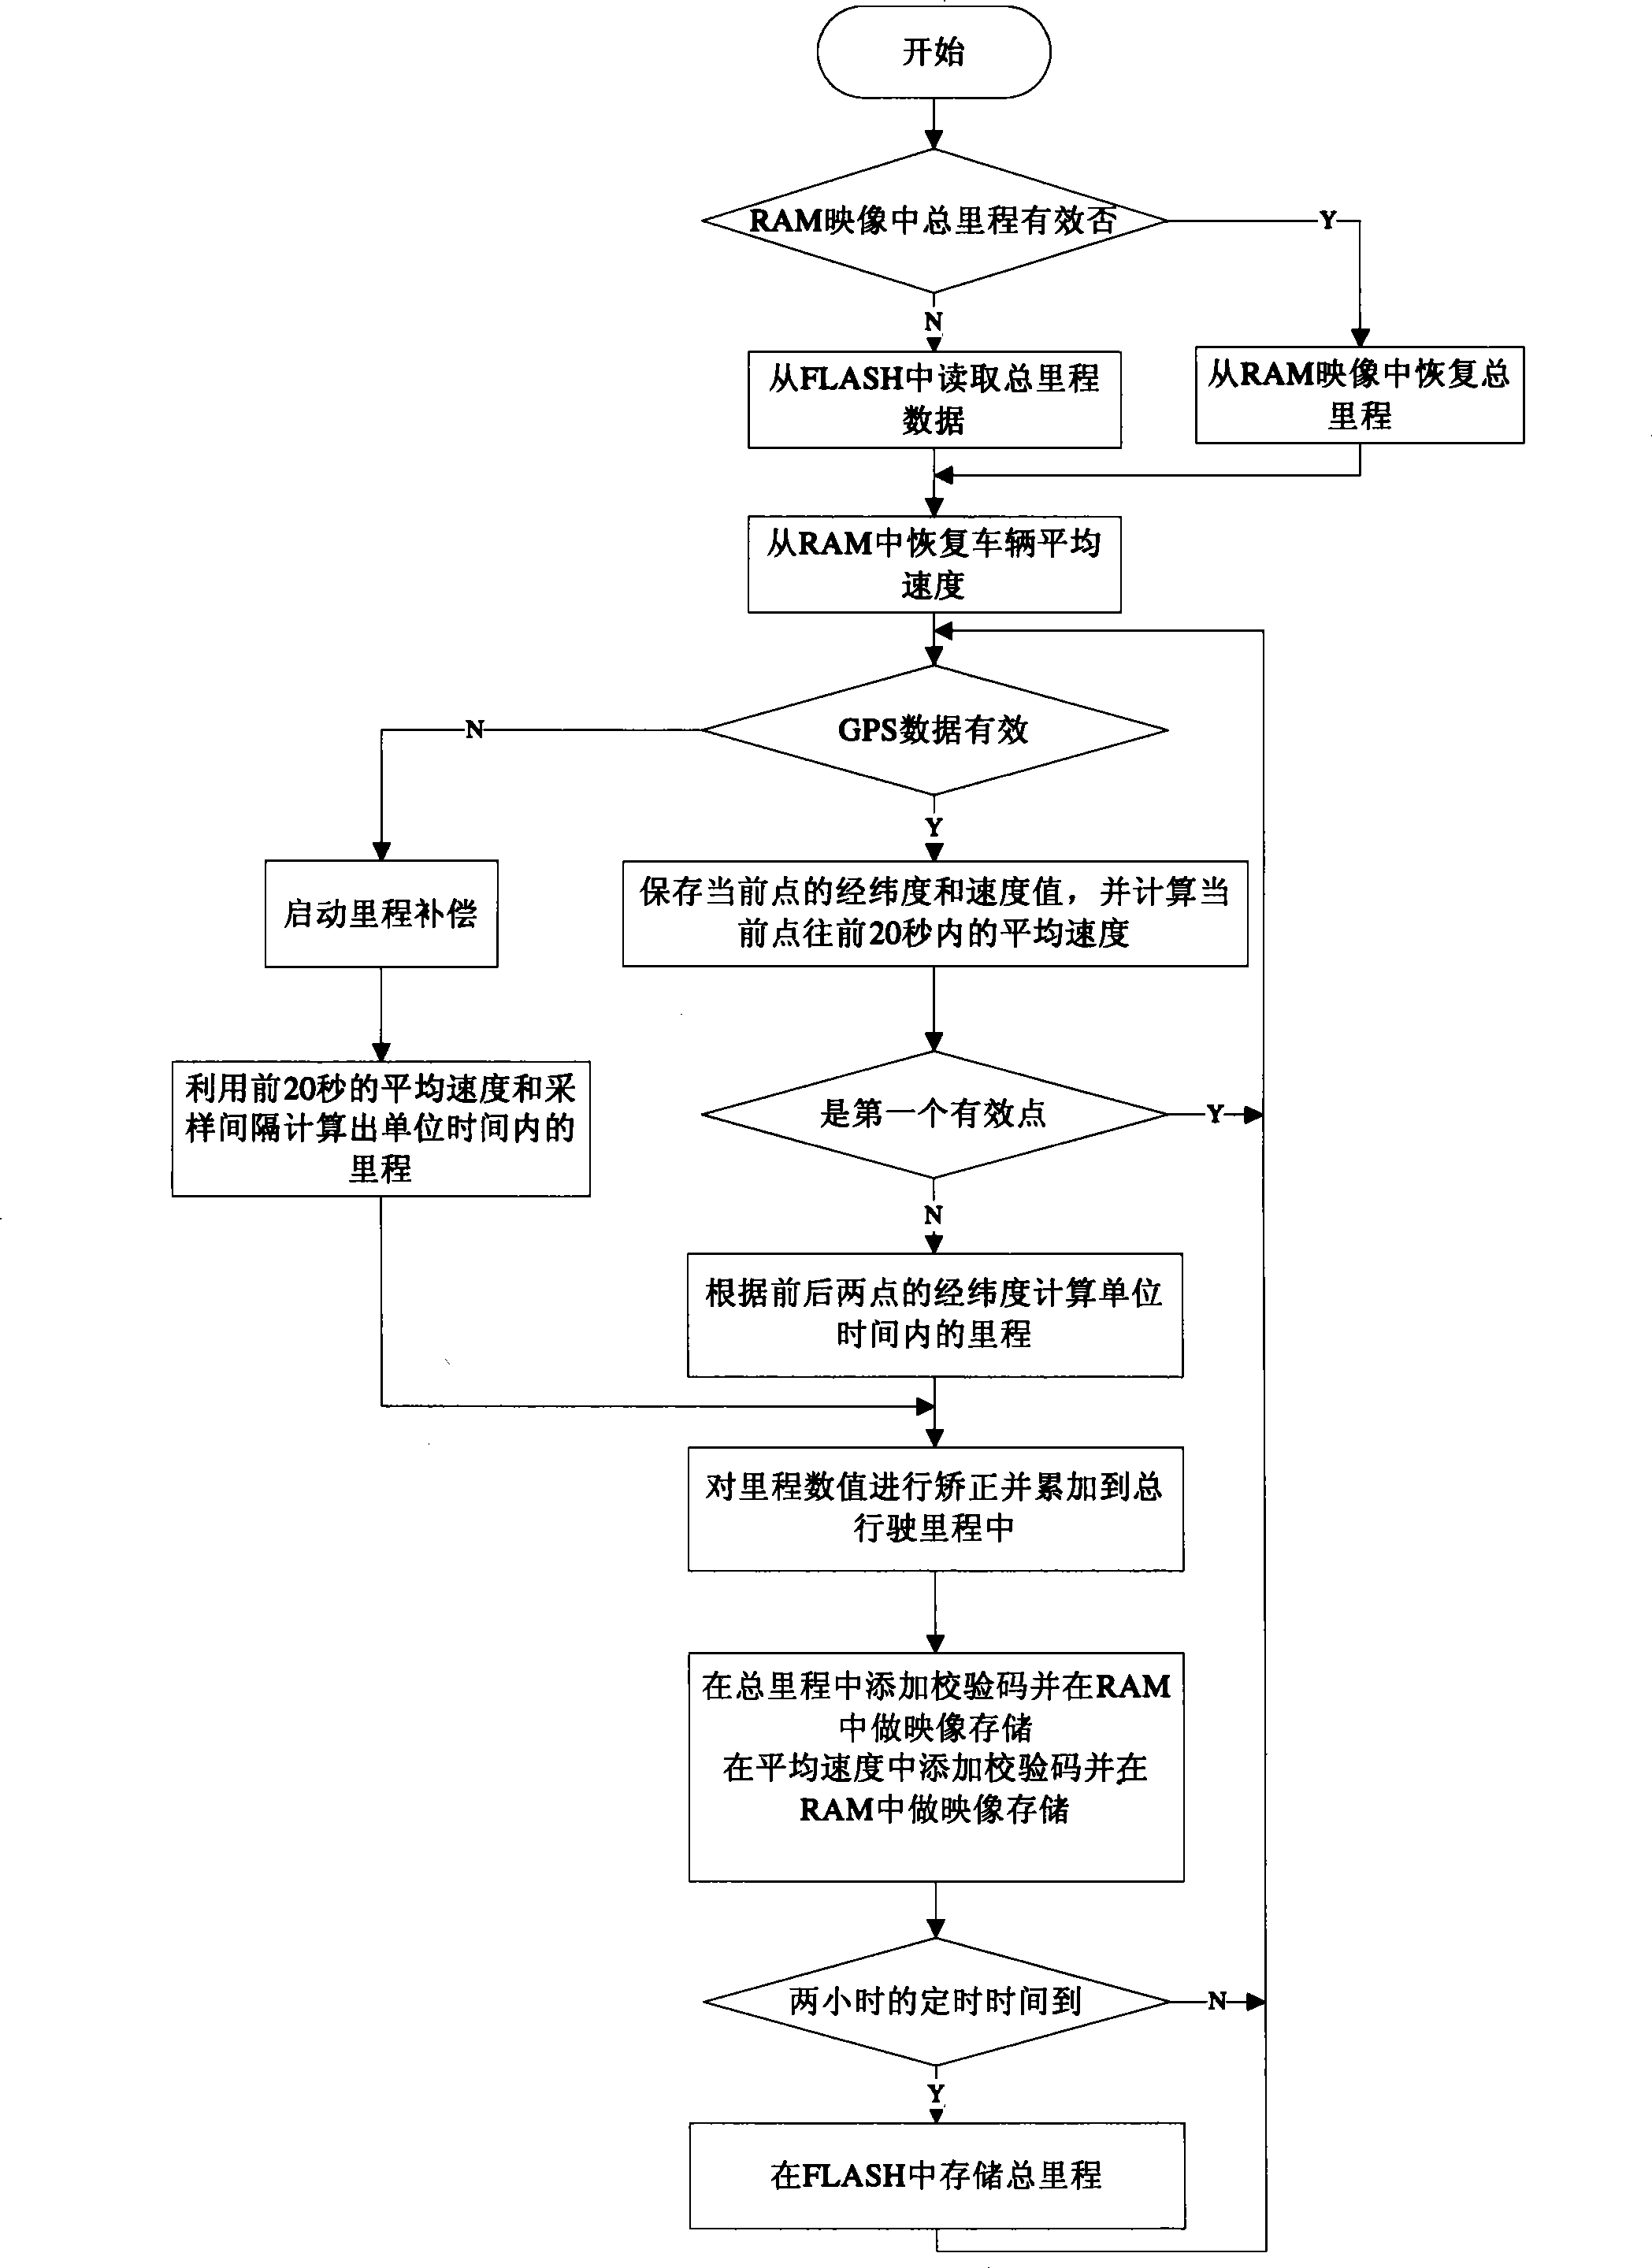 Method for real-time vehicle driving mileage statistics based on wireless network and GPS position information